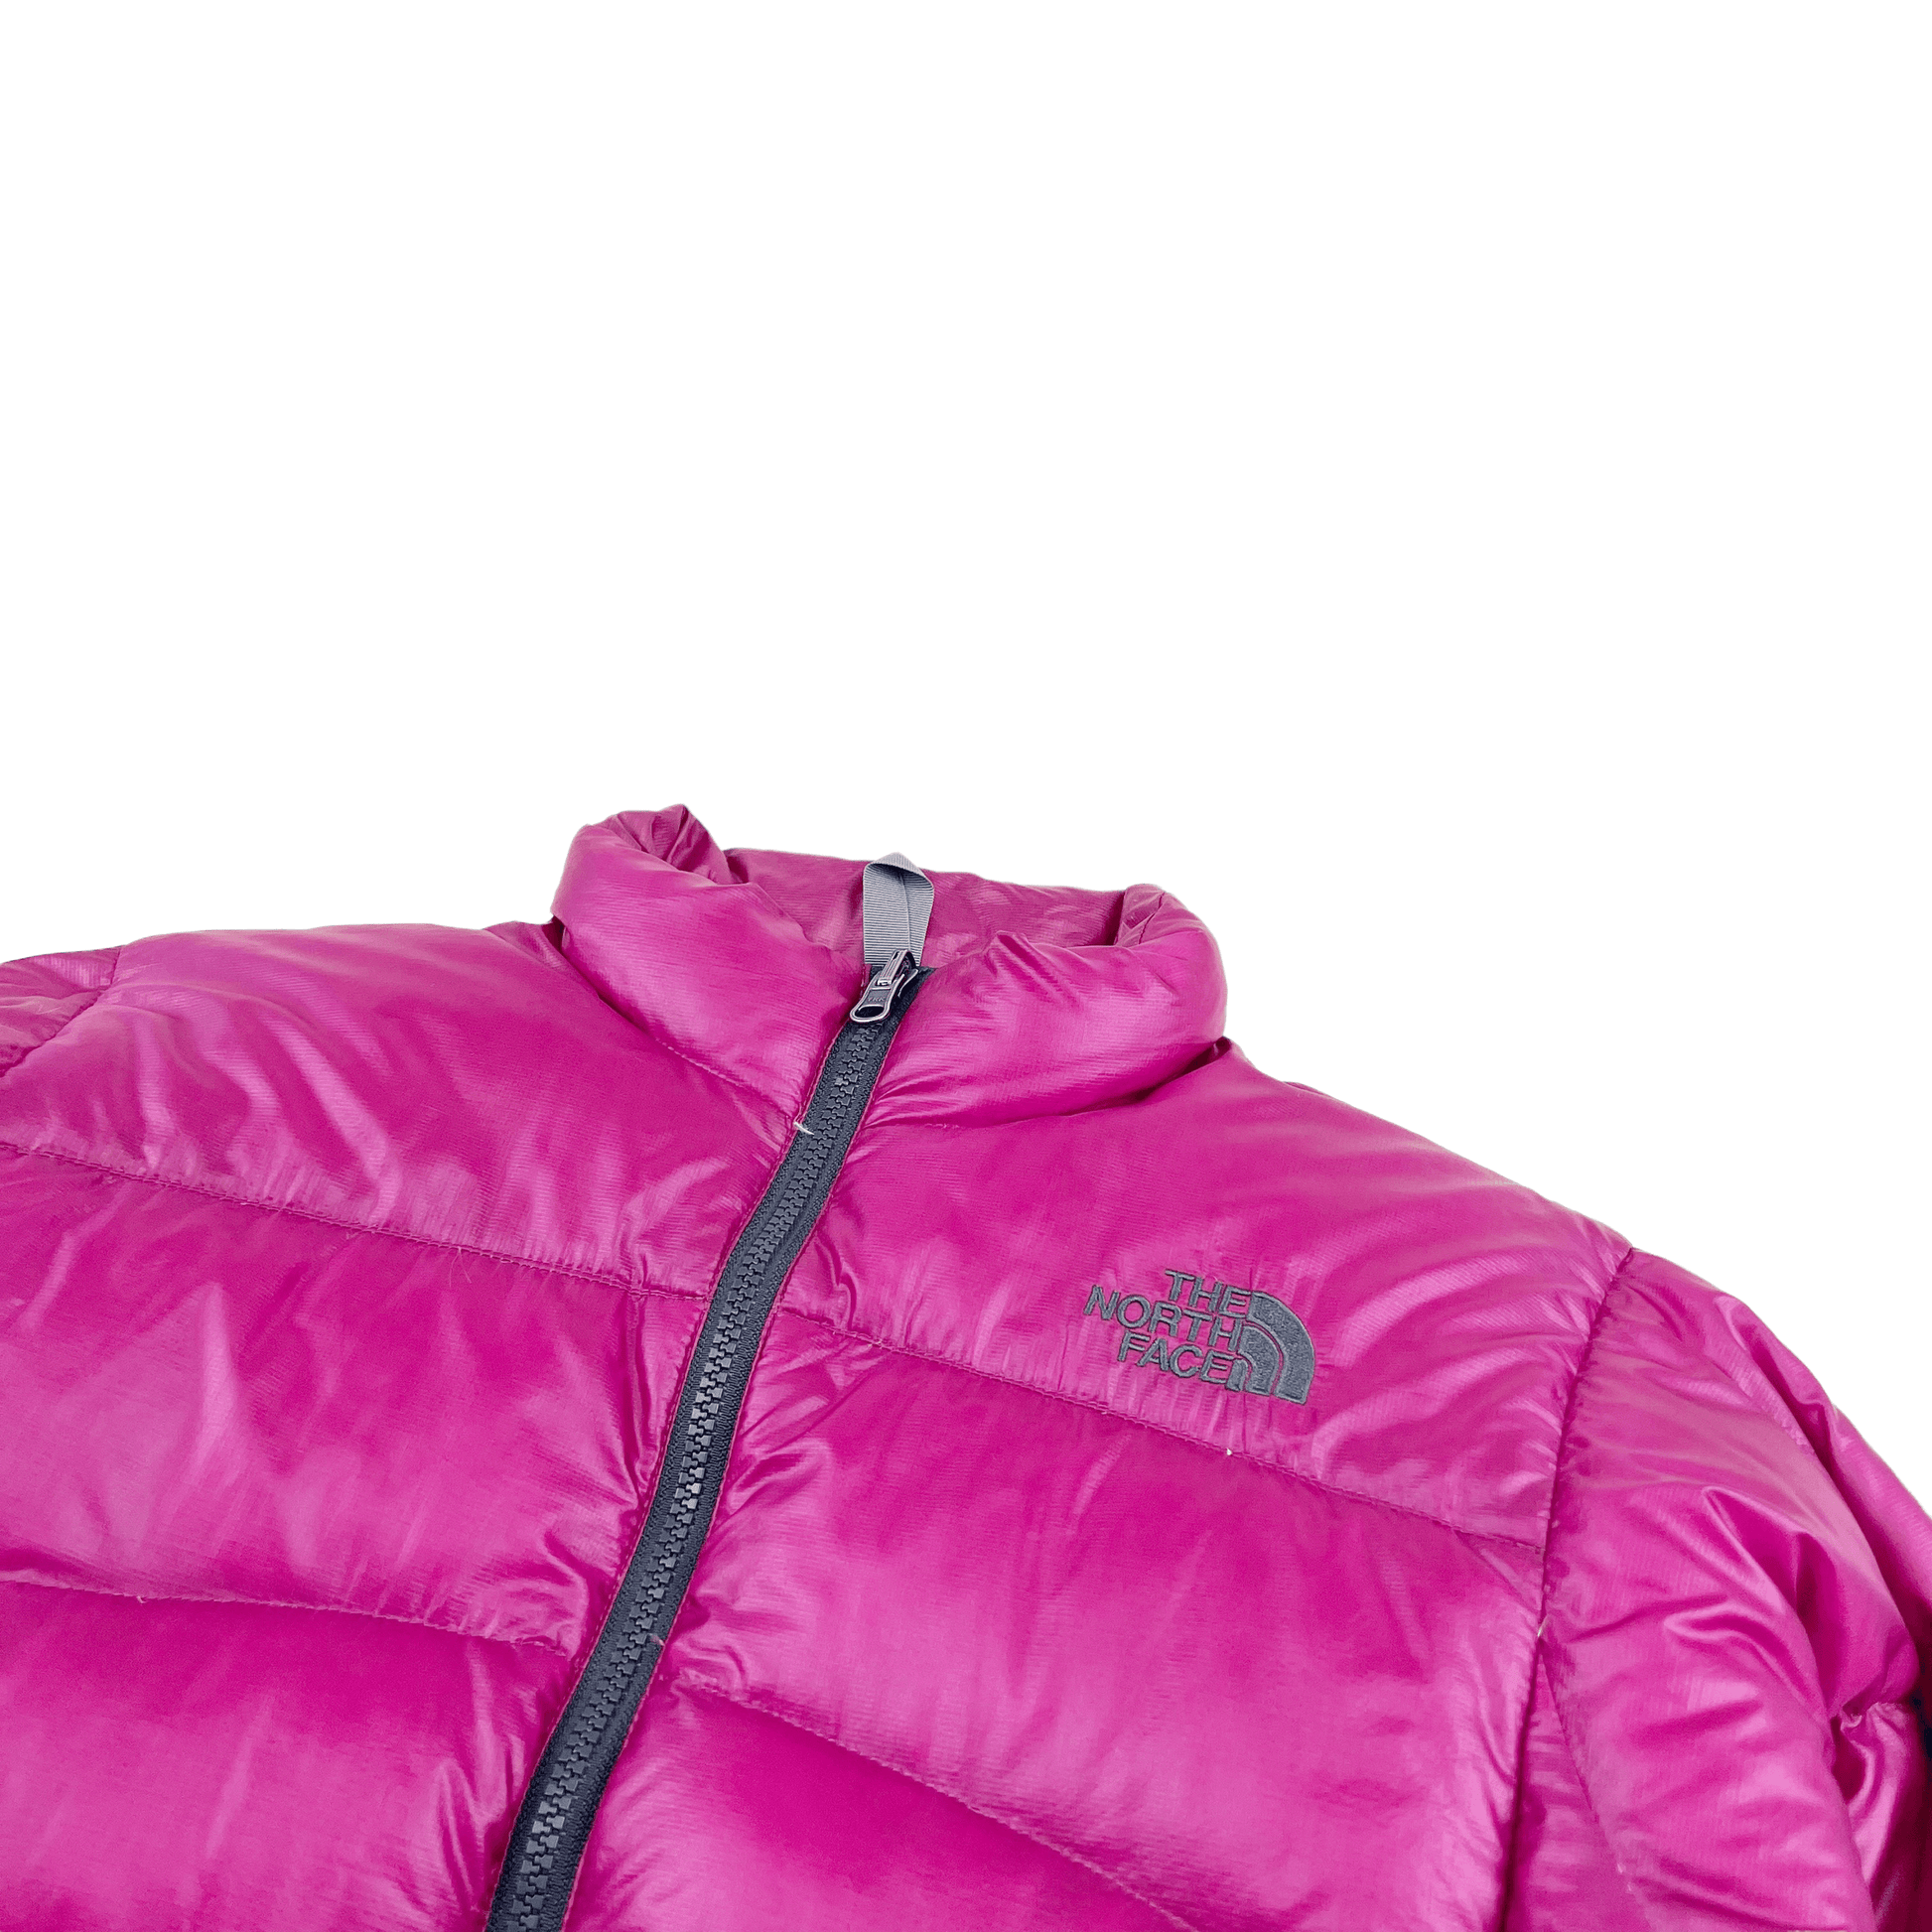 North Face Summit Series Puffer (S) - Known Source